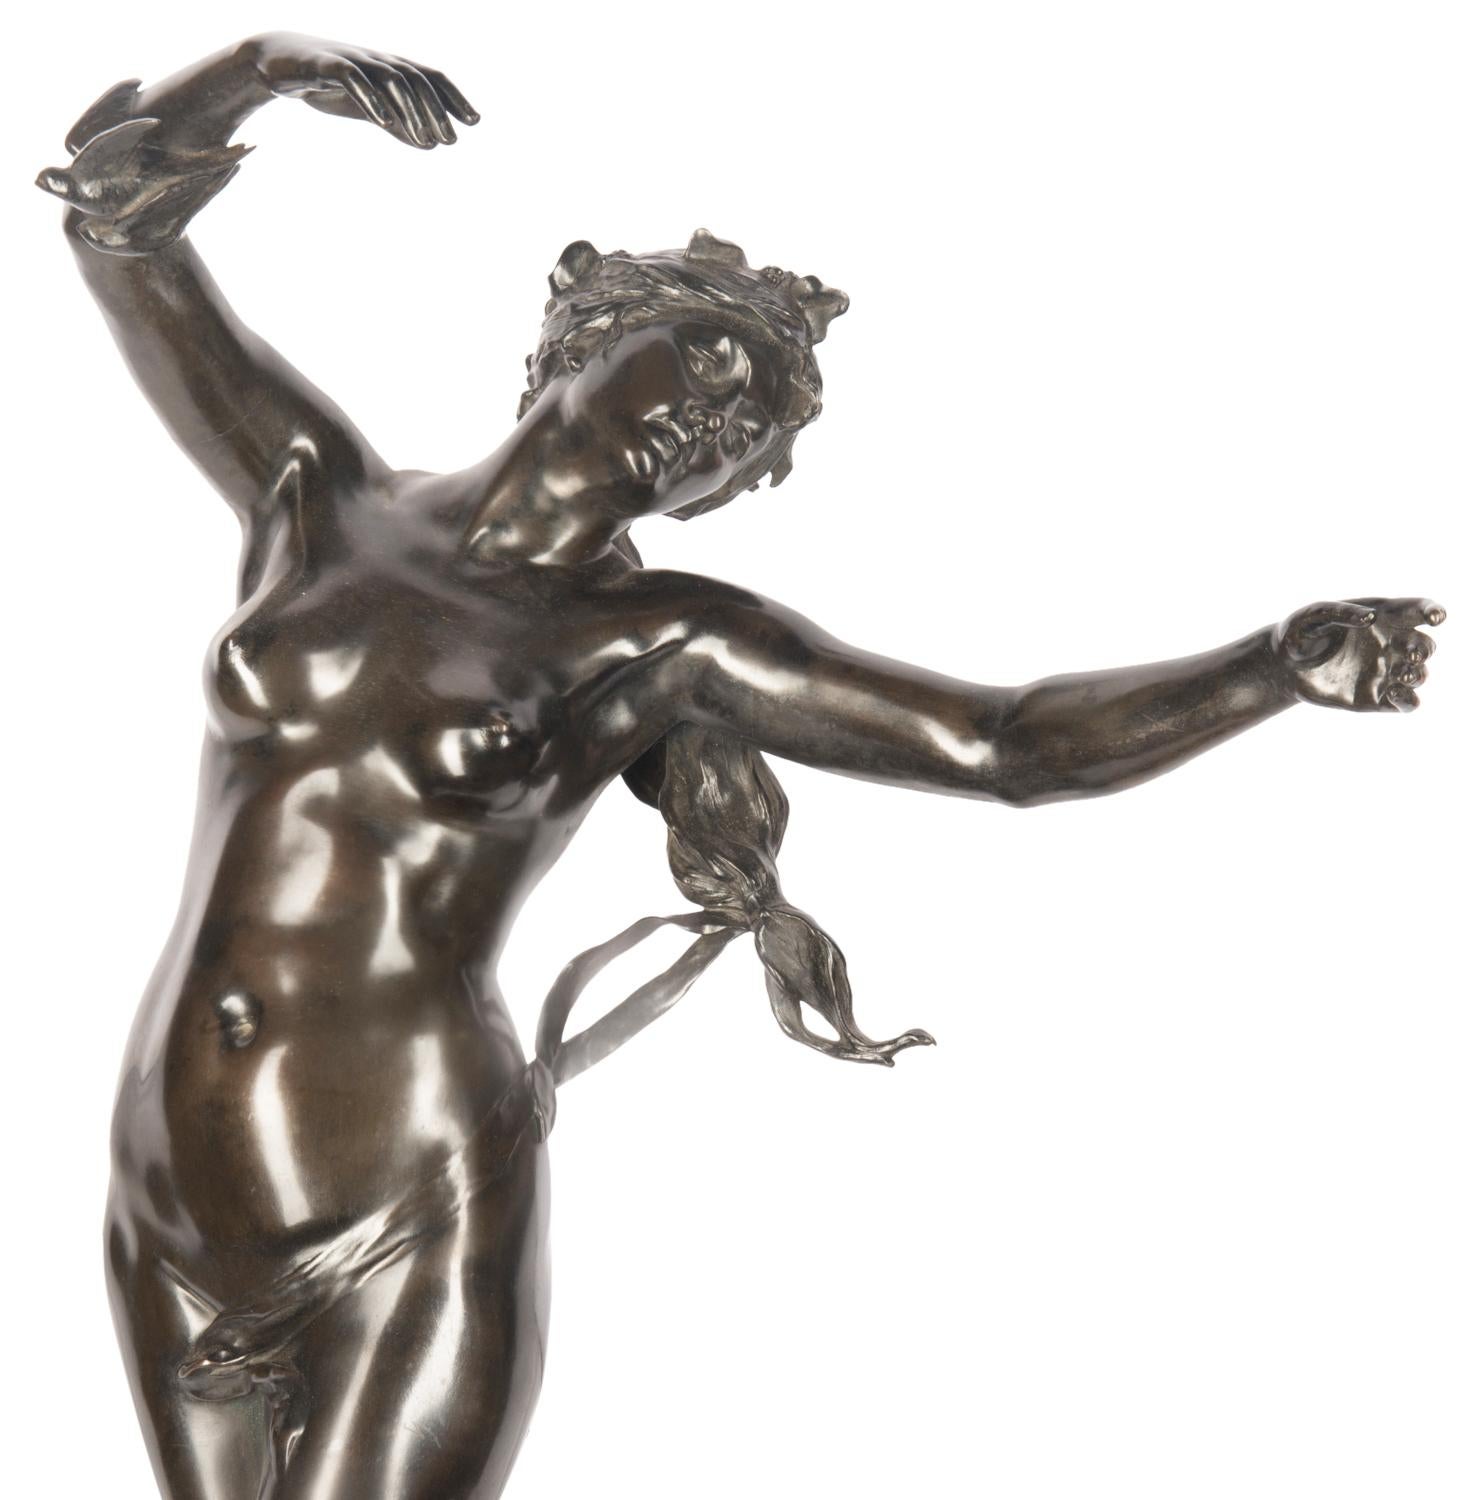 A very good quality 19th century bronze study of a young girl nude dancing, entitled; 'La Chanson' (The Song)
Signed;
Félix Charpentier (10 January 1858 in Bollène in Vaucluse – 1924) was a French sculptor.